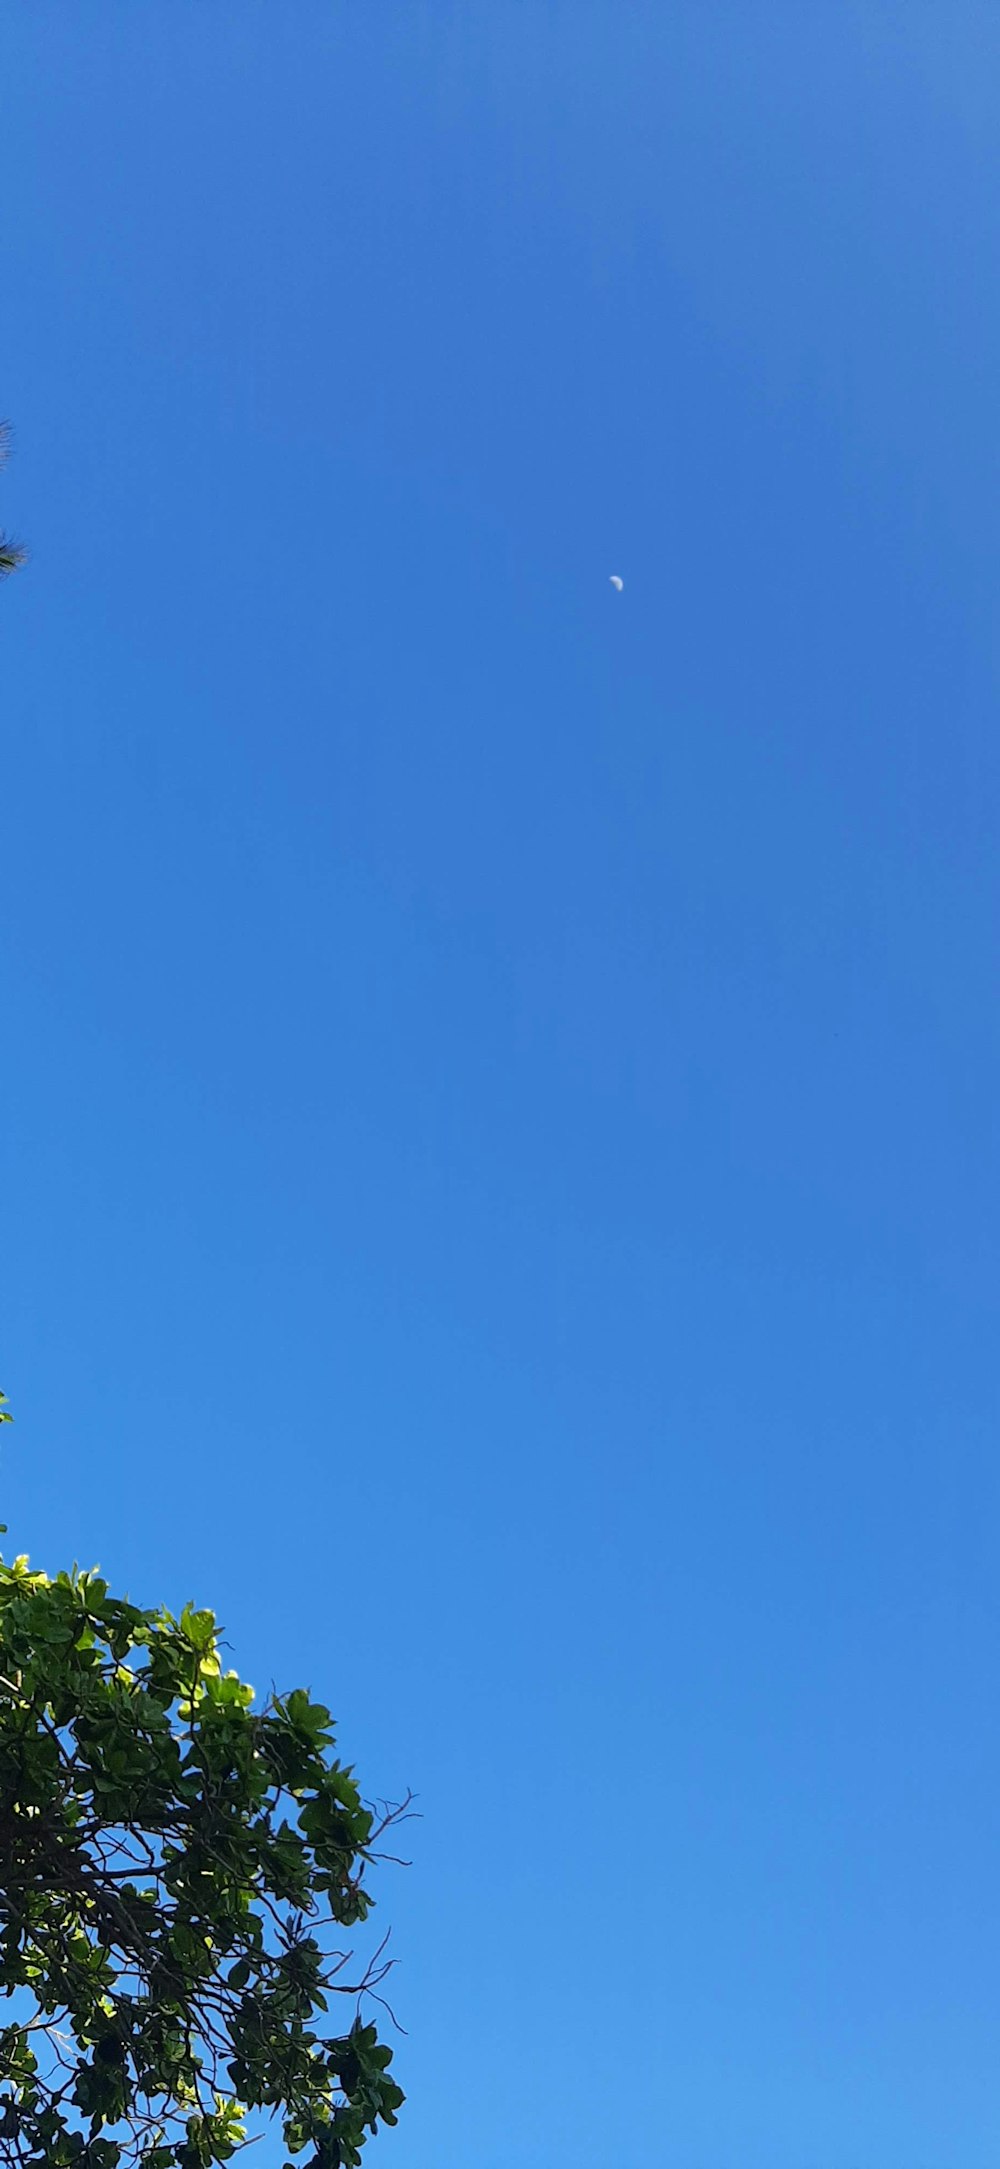 a plane flying high in the blue sky